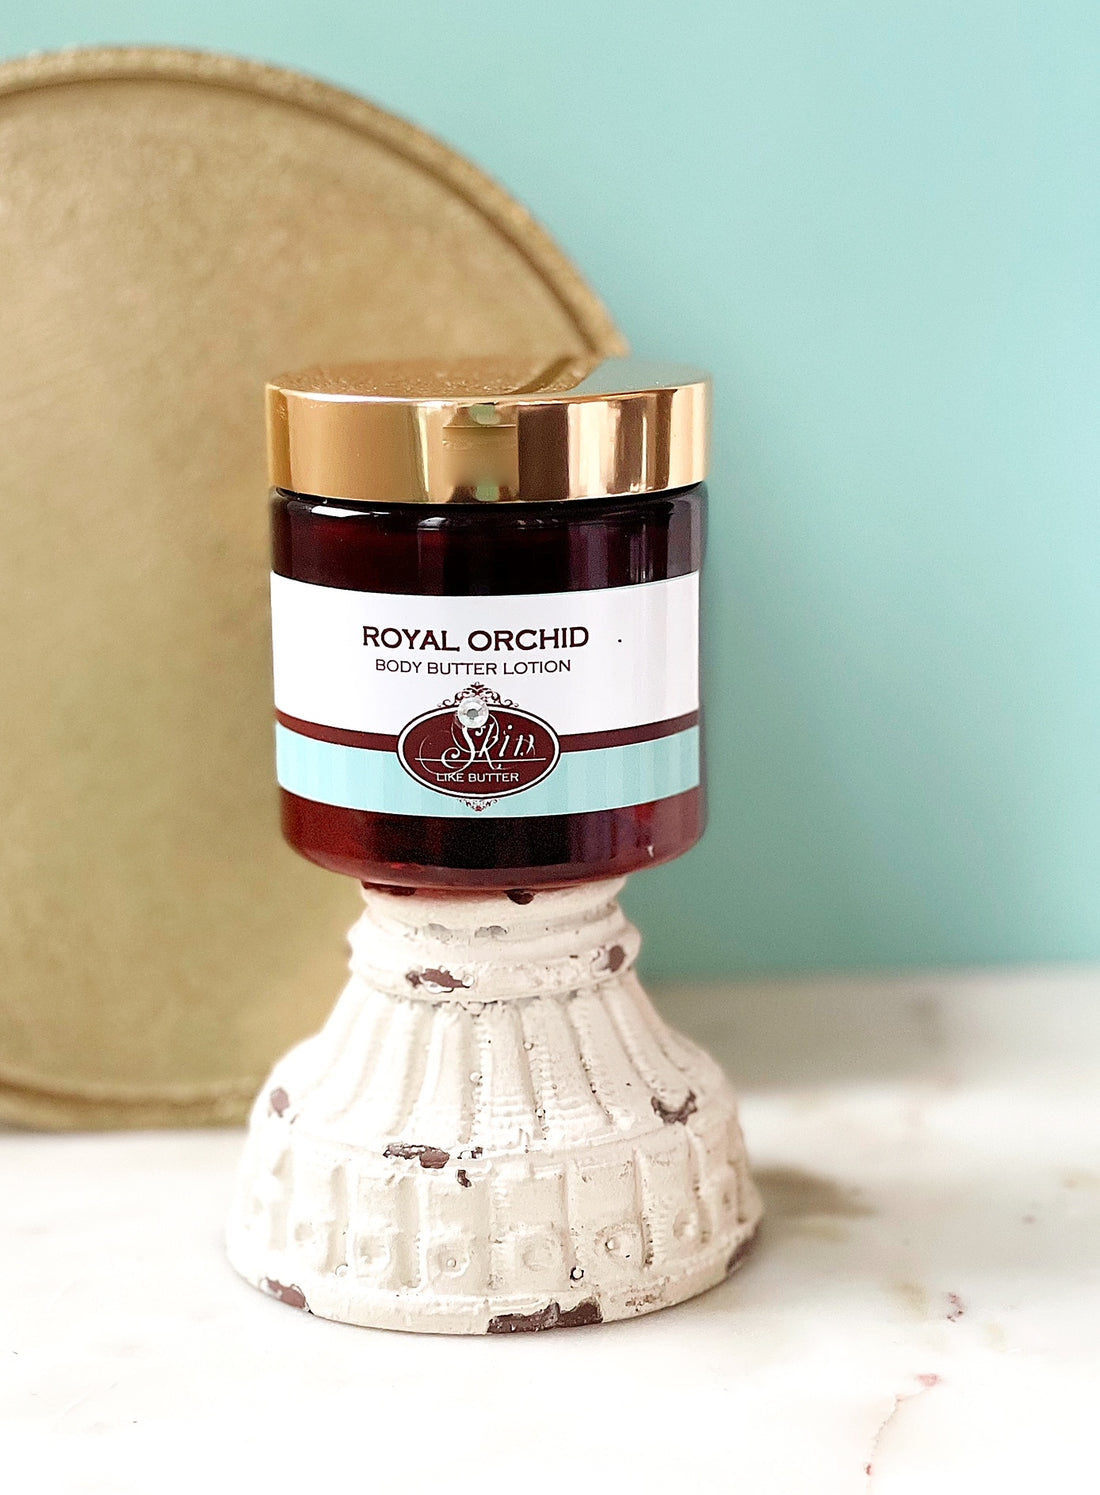 ROYAL ORCHID scented water free, vegan non-greasy Skin Like Butter Body Butter